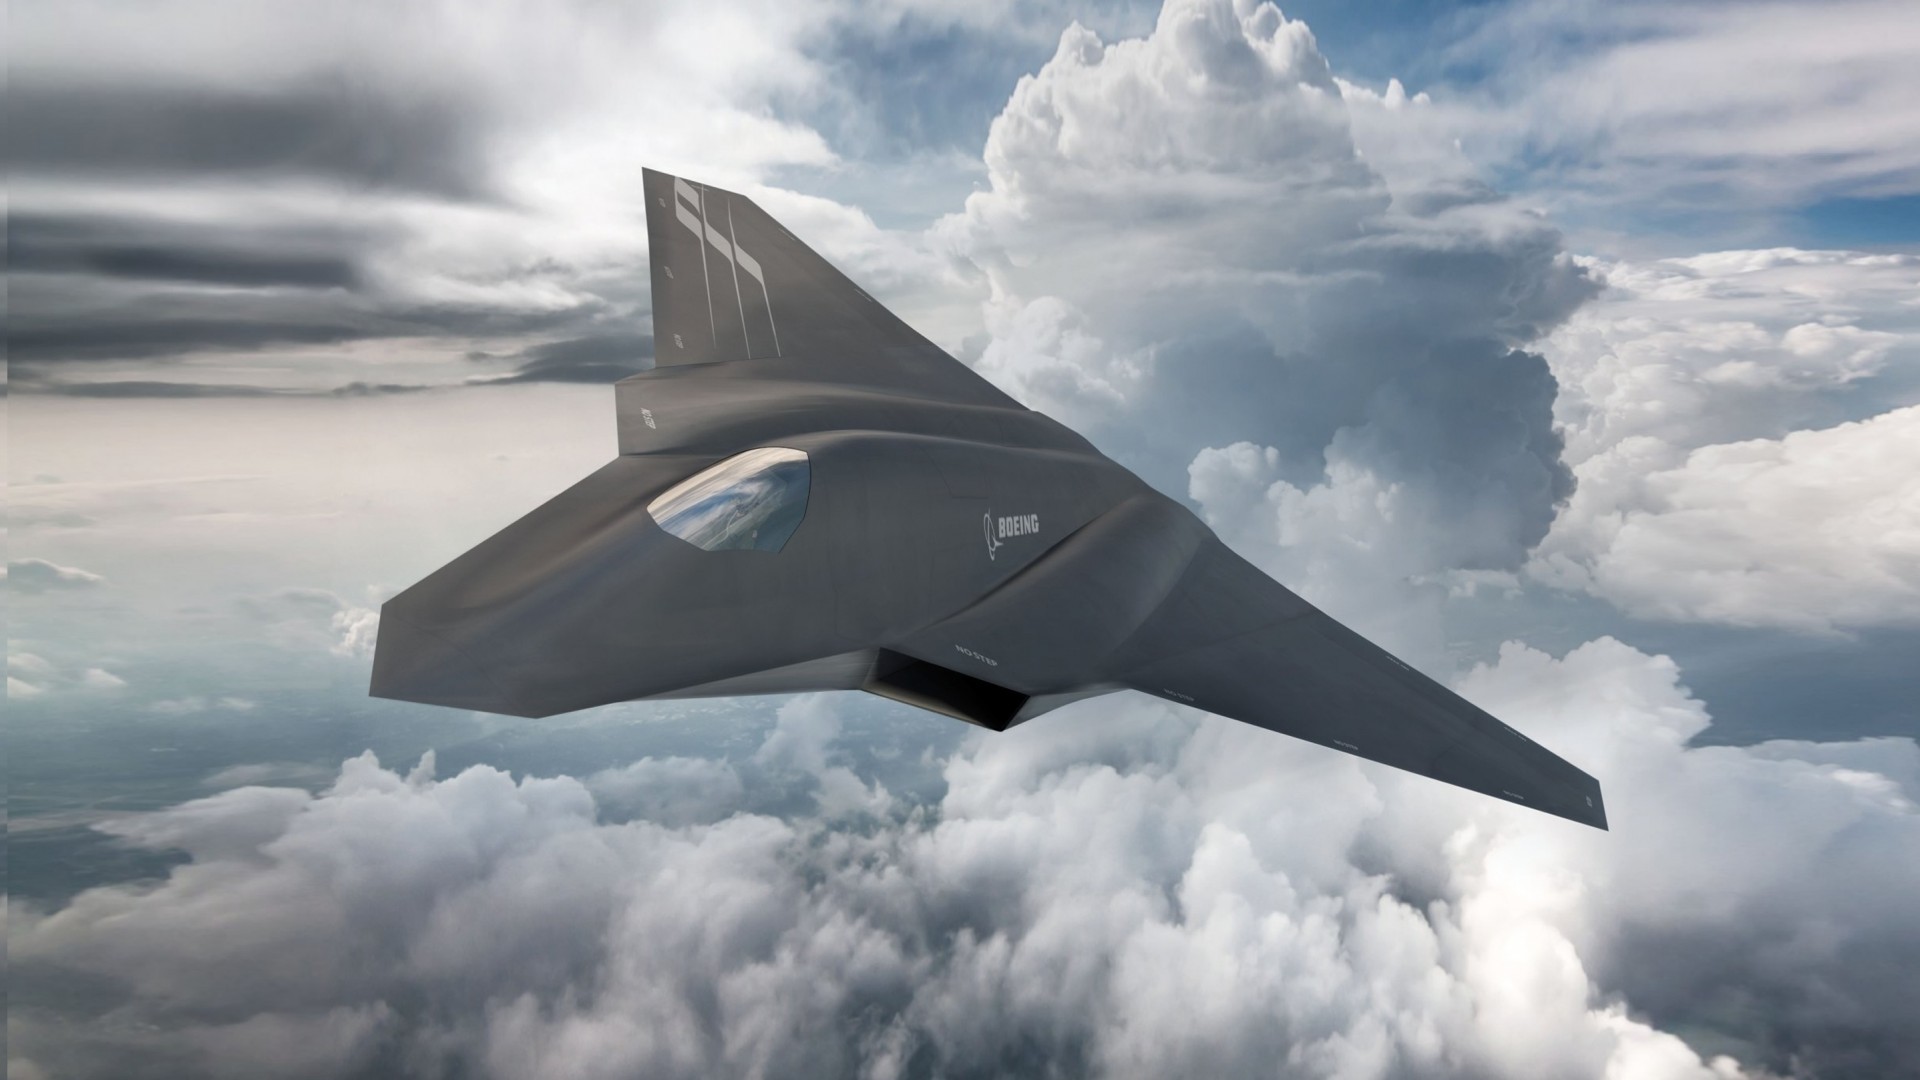 Wallpaper Boeing Fx Fighter Aircraft Concept Us Air Force Hd Military 3347 1920x1080